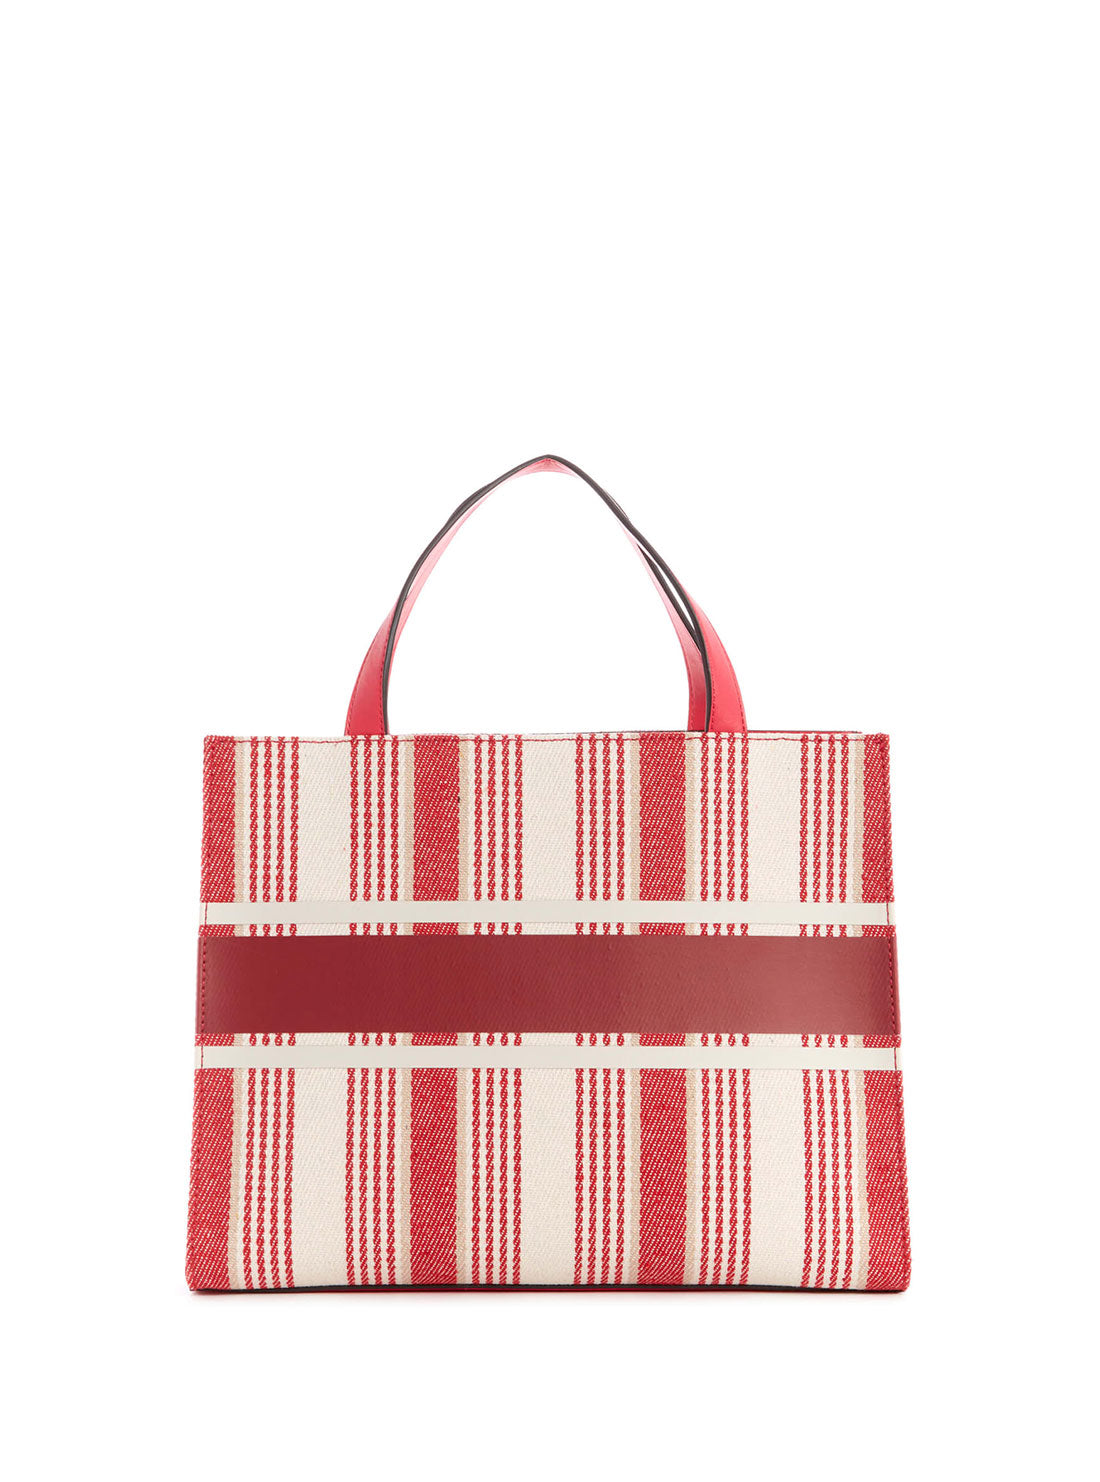 GUESS Red Stripe Monique Small Tote Bag back view